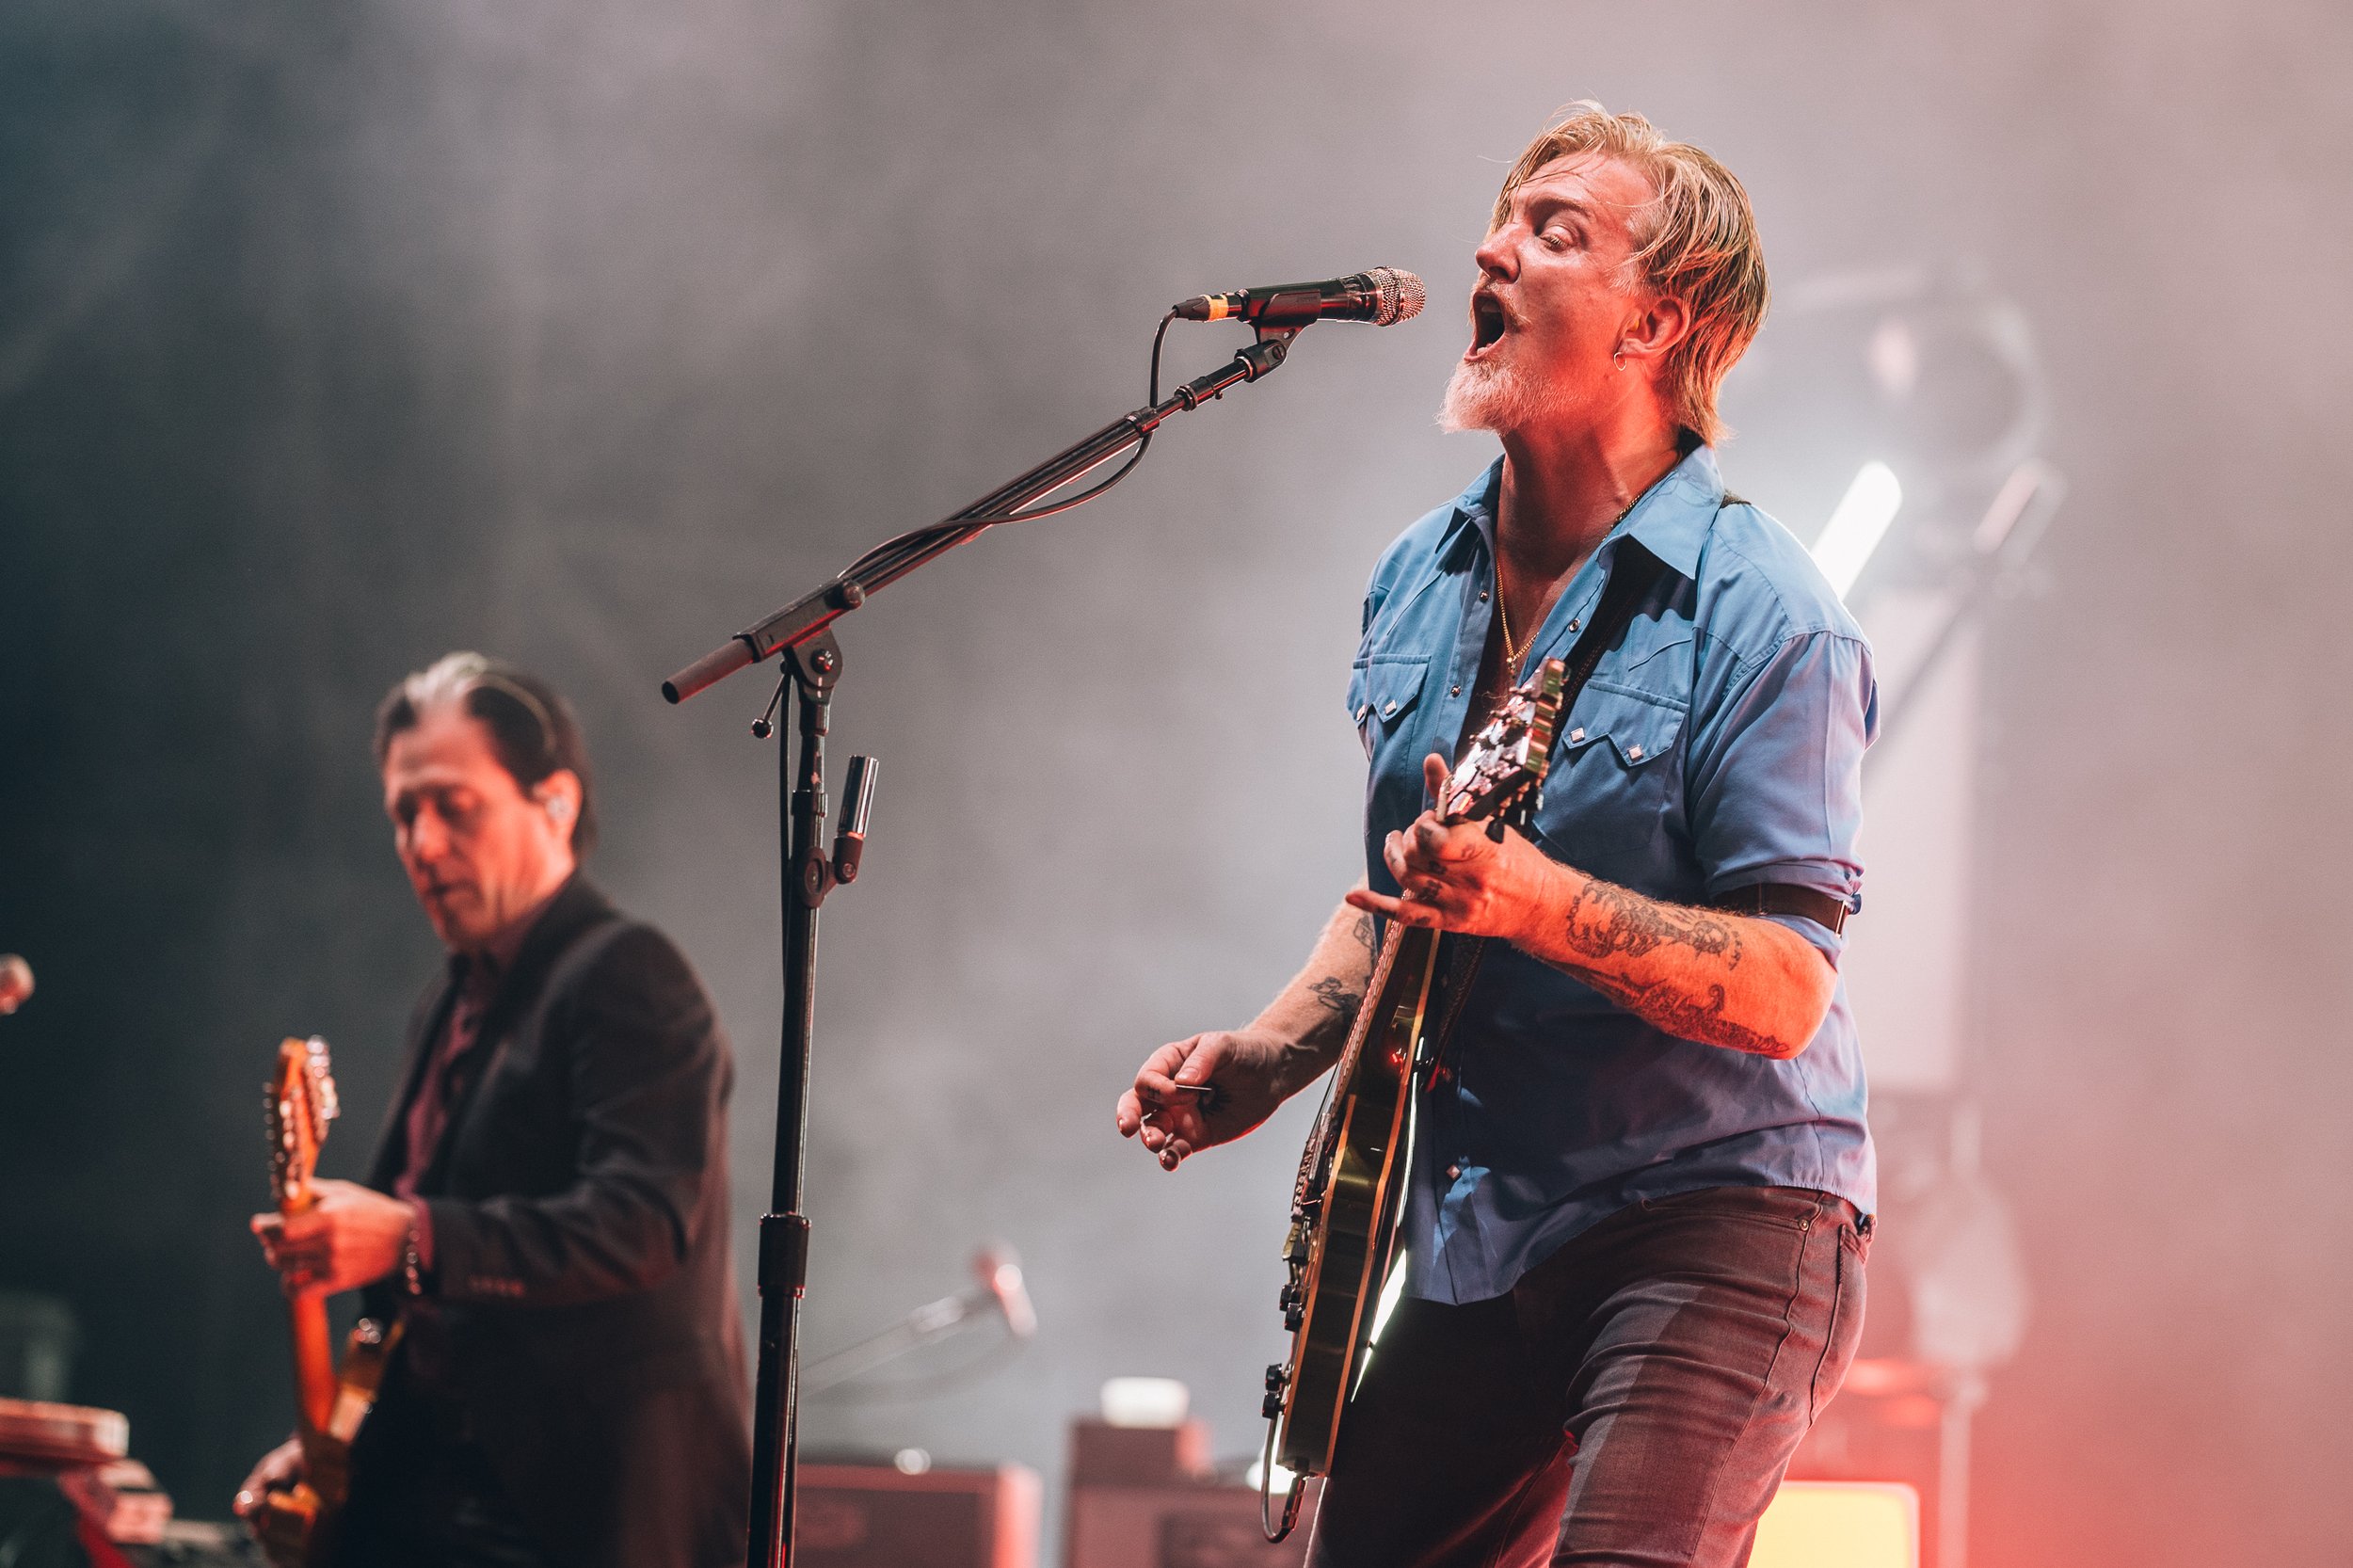 20230707_NOS_ALIVE_QUEENS_OF_THE_STONE_AGE_JOAOSILVAGD_08815.jpg